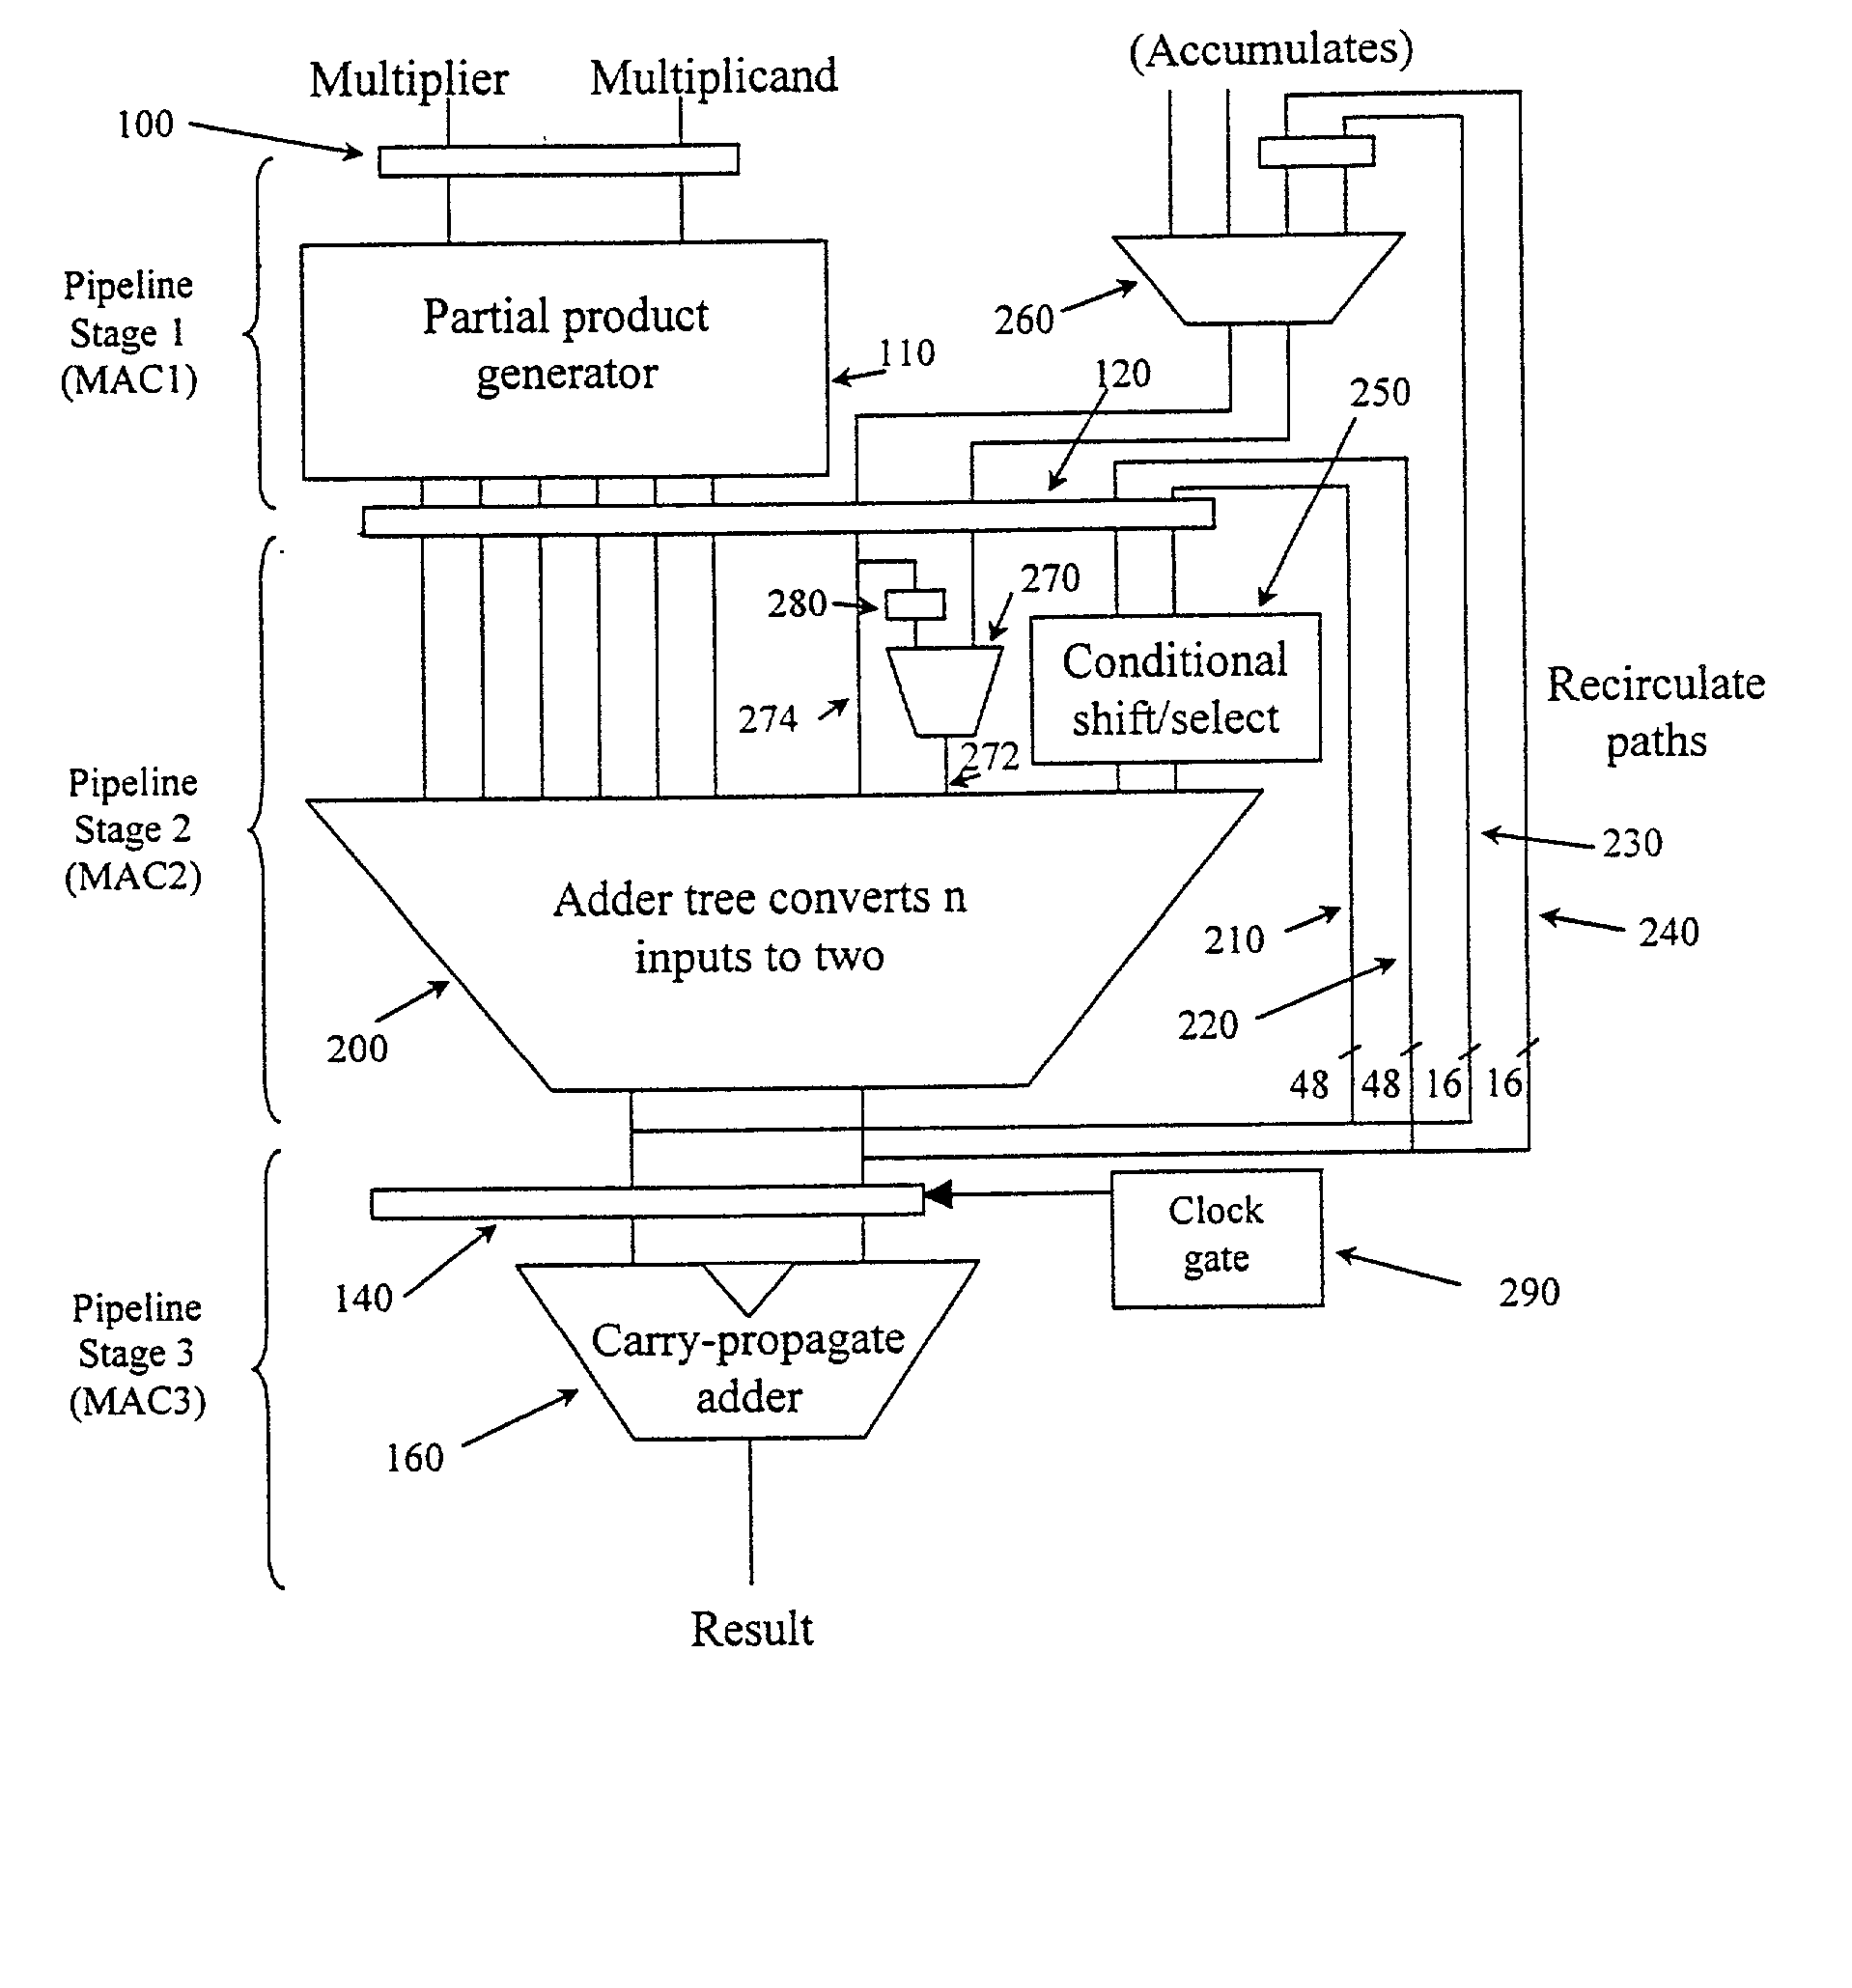 Apparatus and method for performing multiplication operations